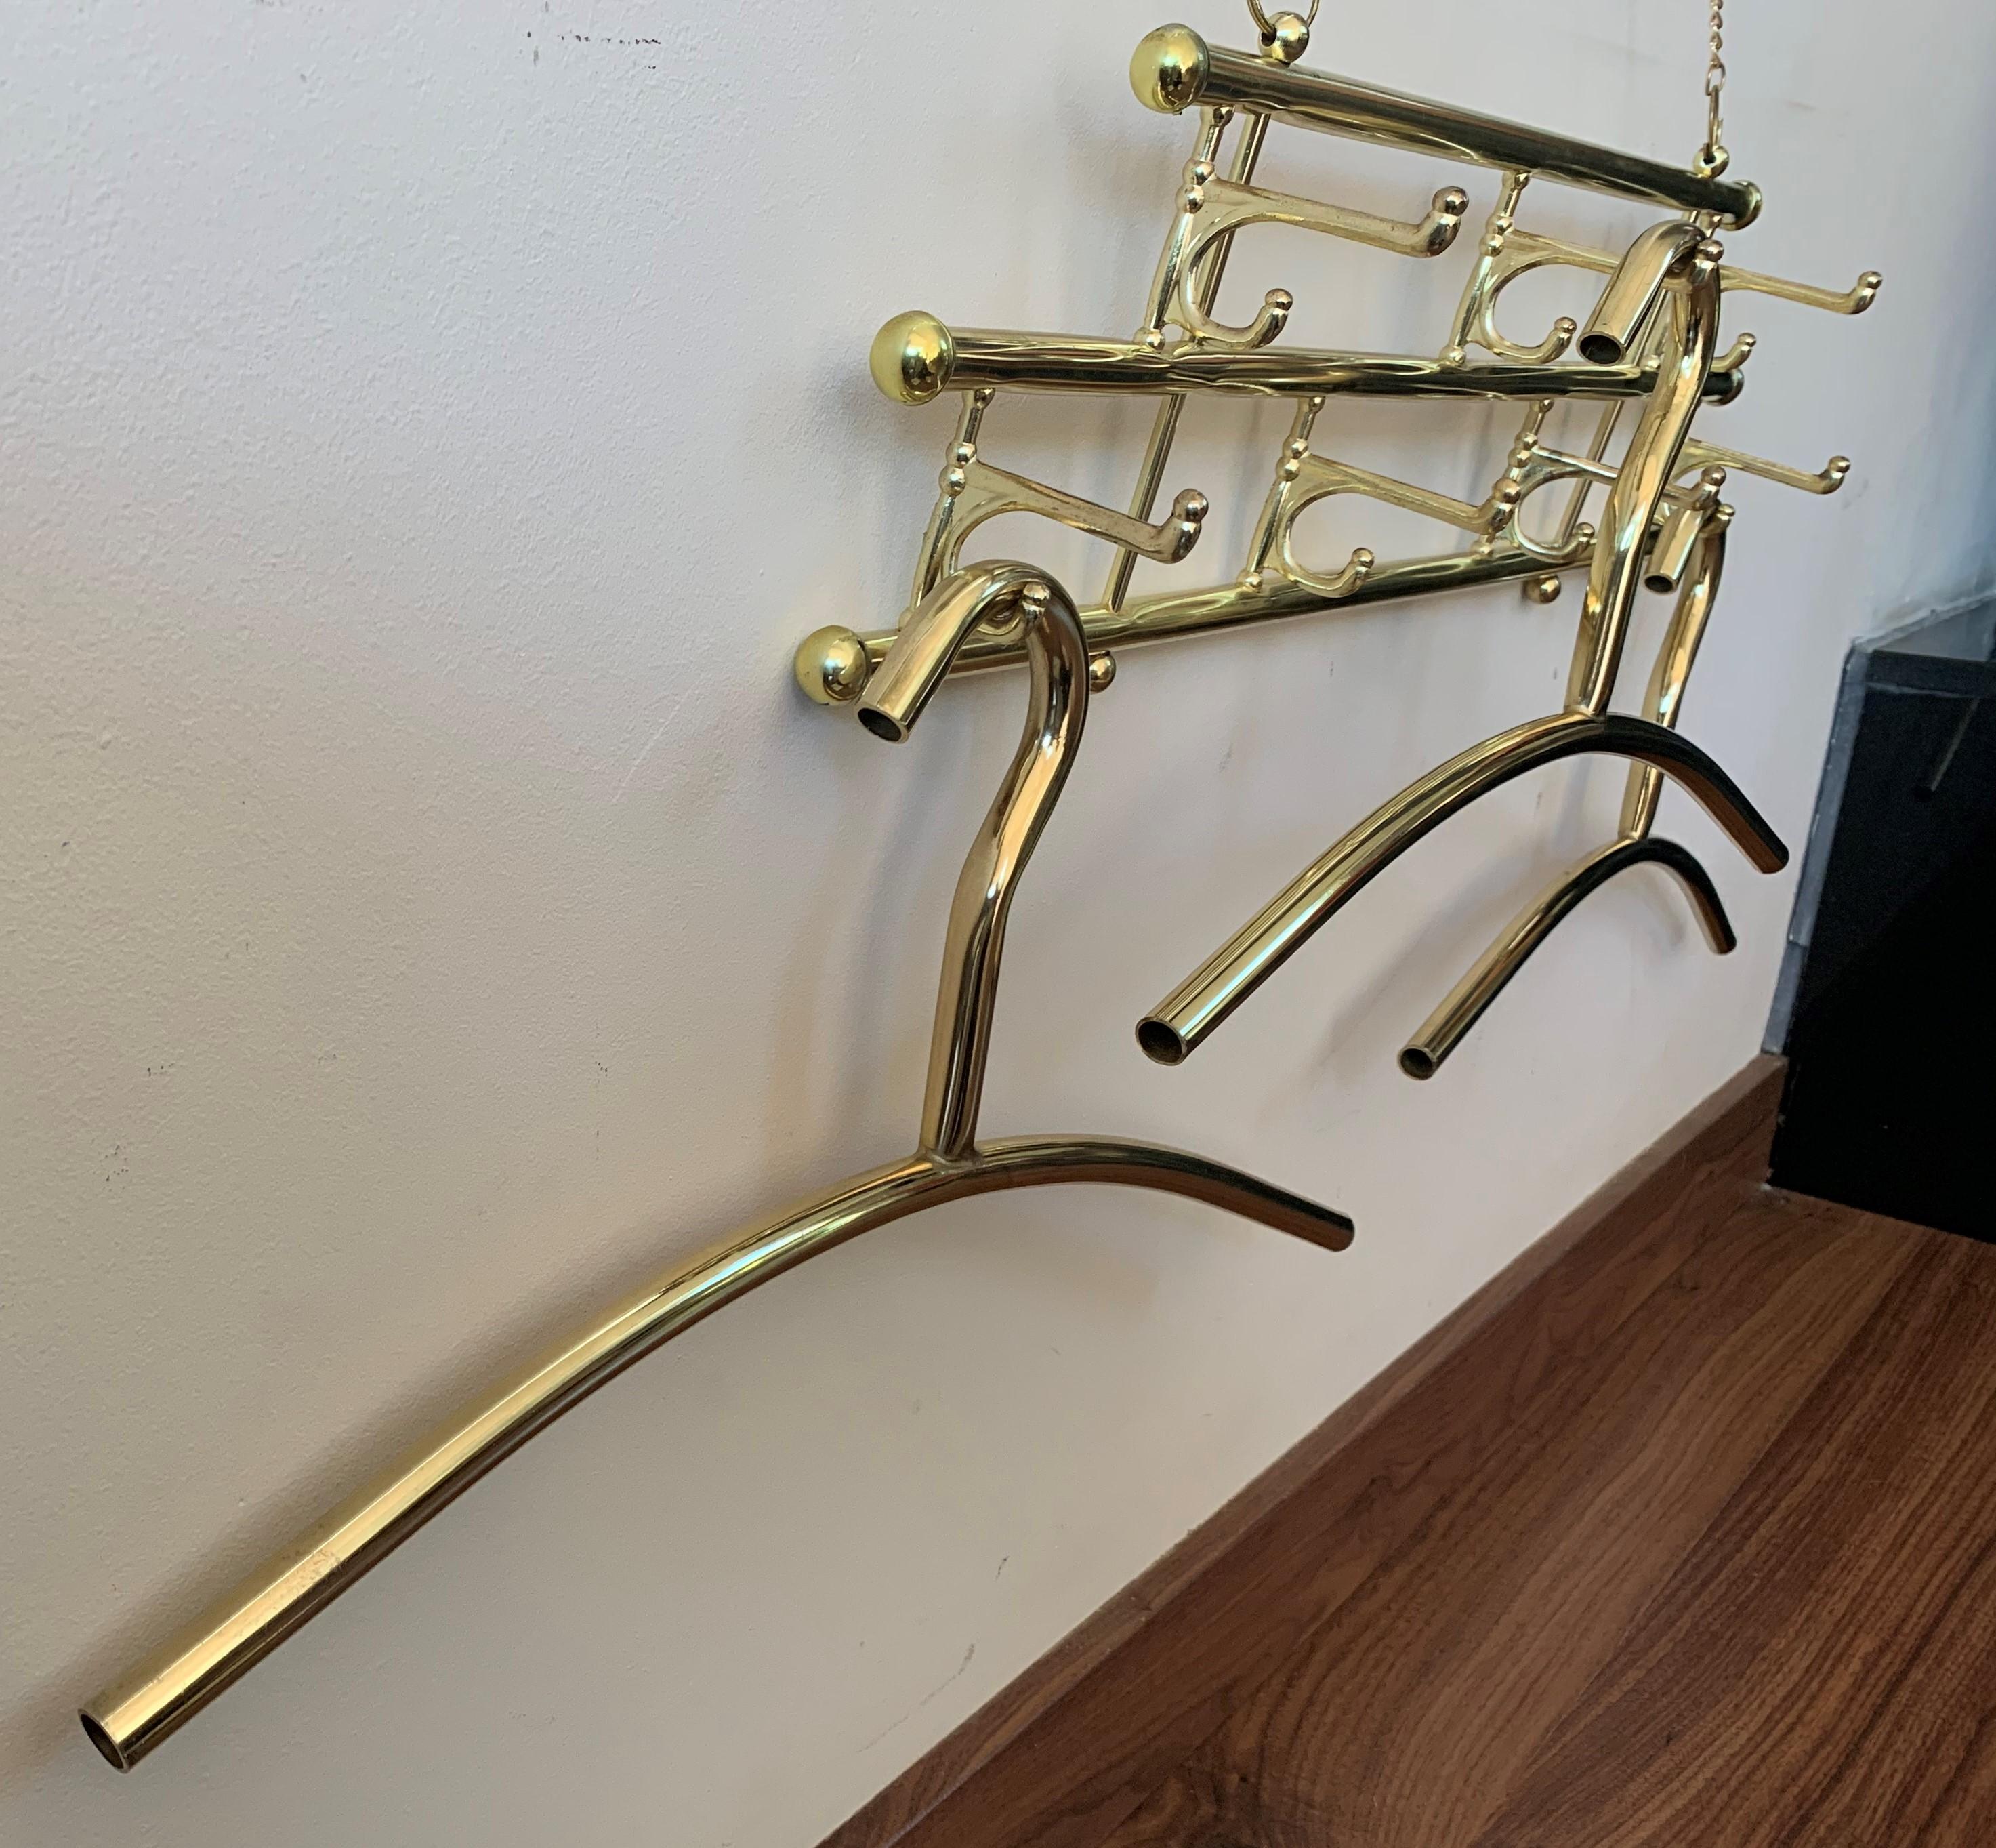 20th Century Brass Foldable Wall Coat Rack with Seven Hangers Midcentury / Art Deco, 1940s